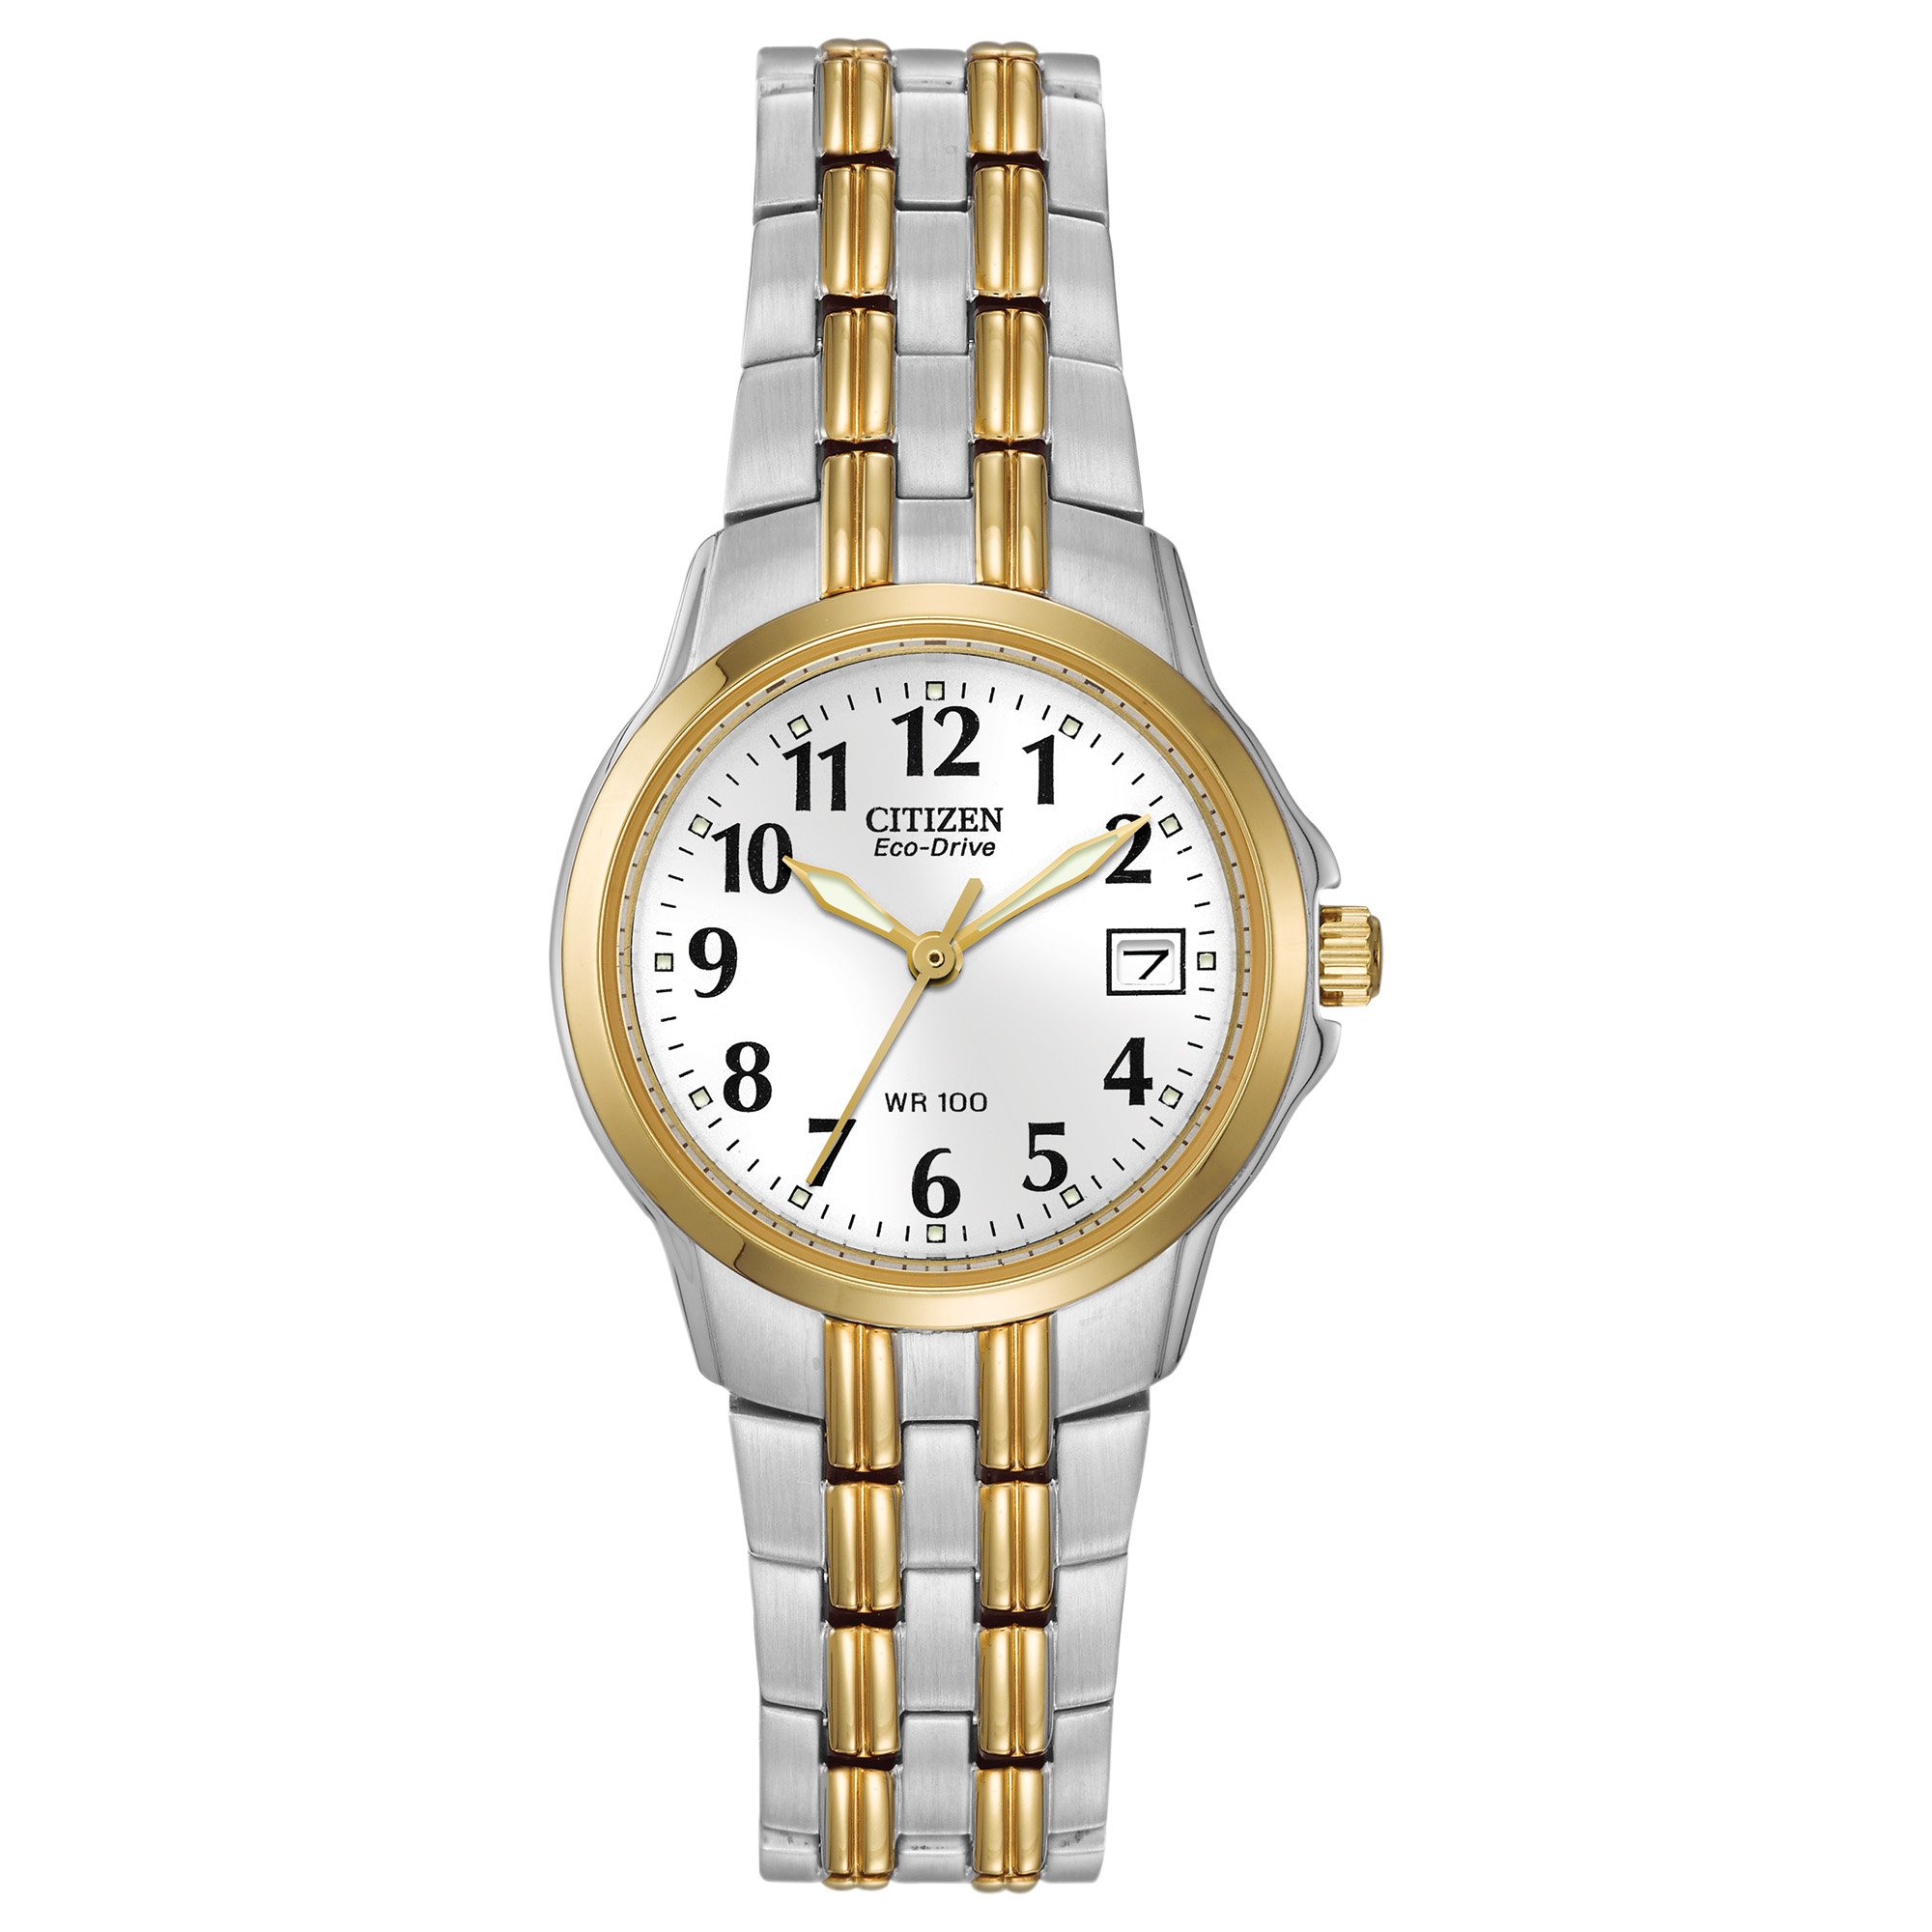 Citizen Women's Eco-Drive Dress Classic Watch in Two-tone Stainless Steel, White Dial (Model: EW1544-53A)